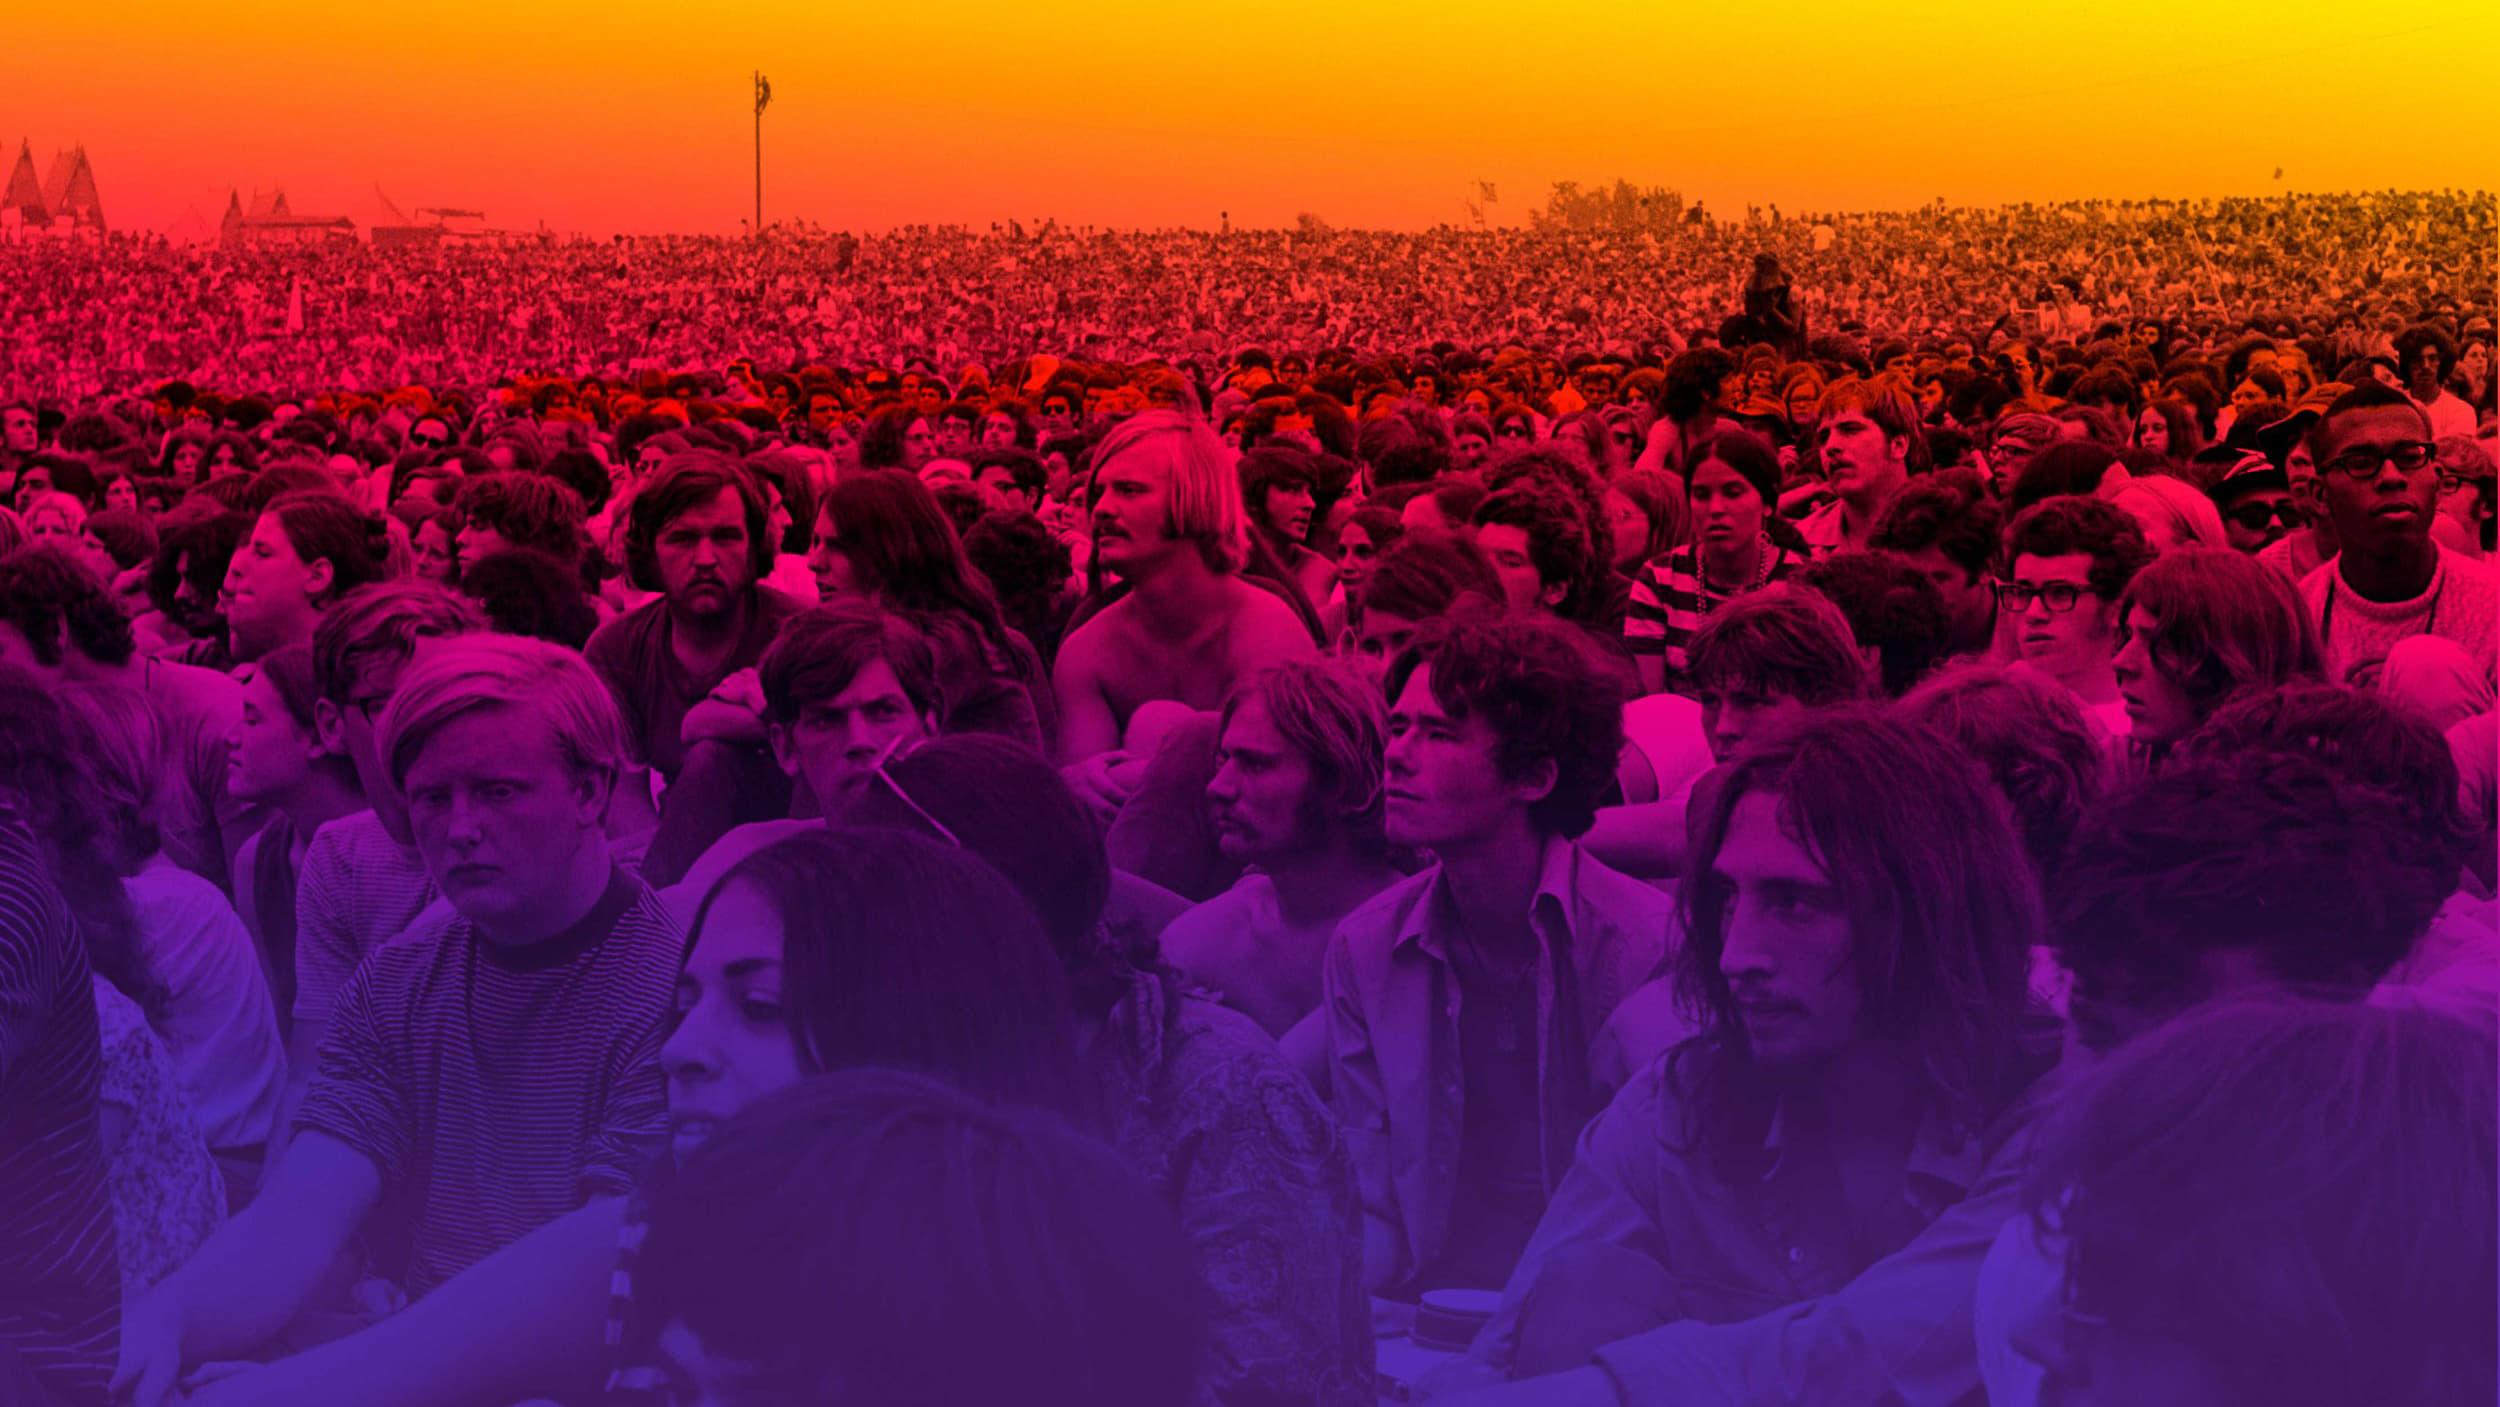 Woodstock: Three Days That Defined a Generation backdrop